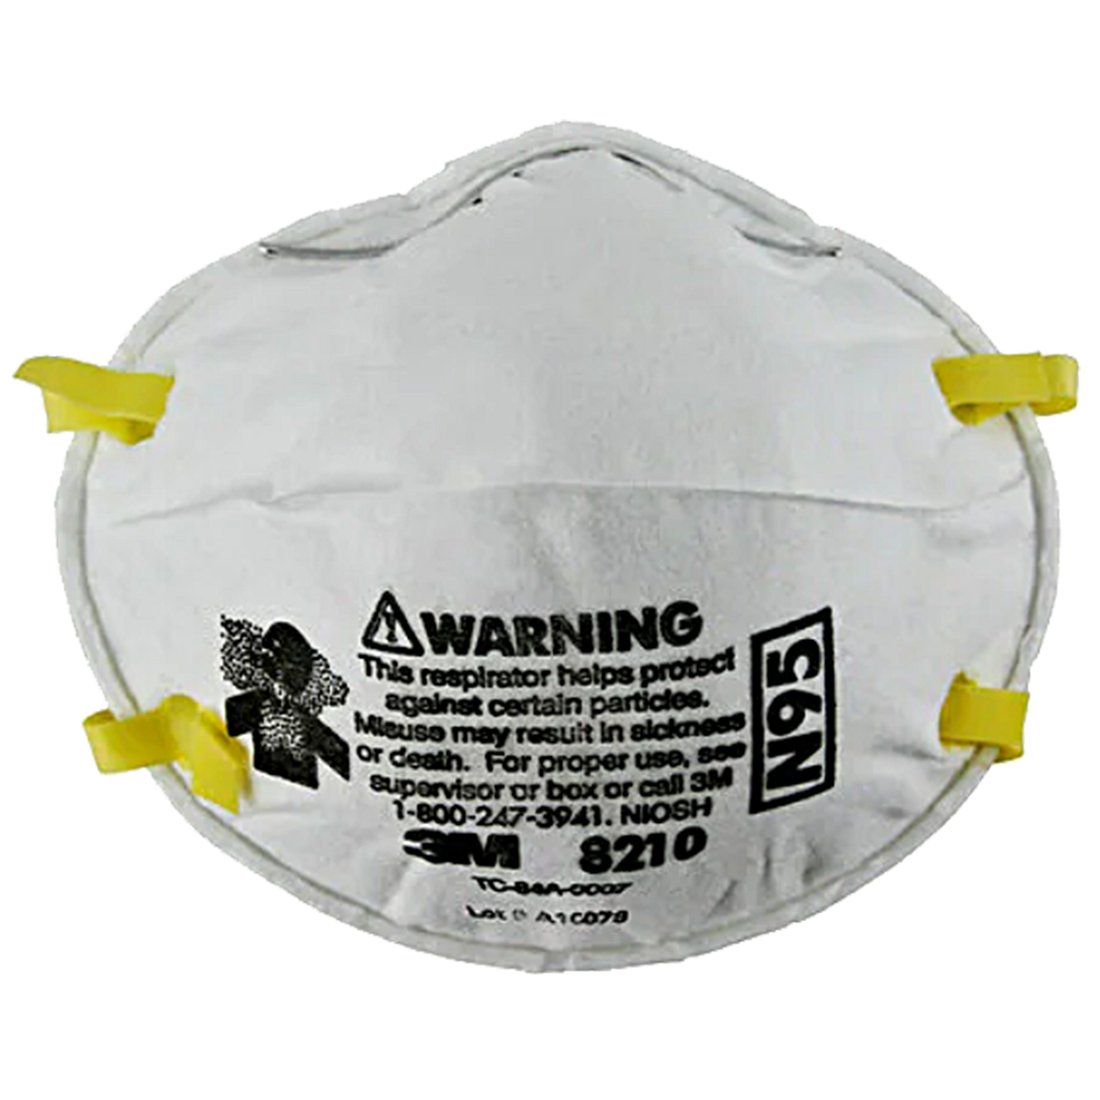 3M™ Particulate Respirator 8210, N95 Mask 20 EA/Box or 160 EA/Case (8 Boxes)